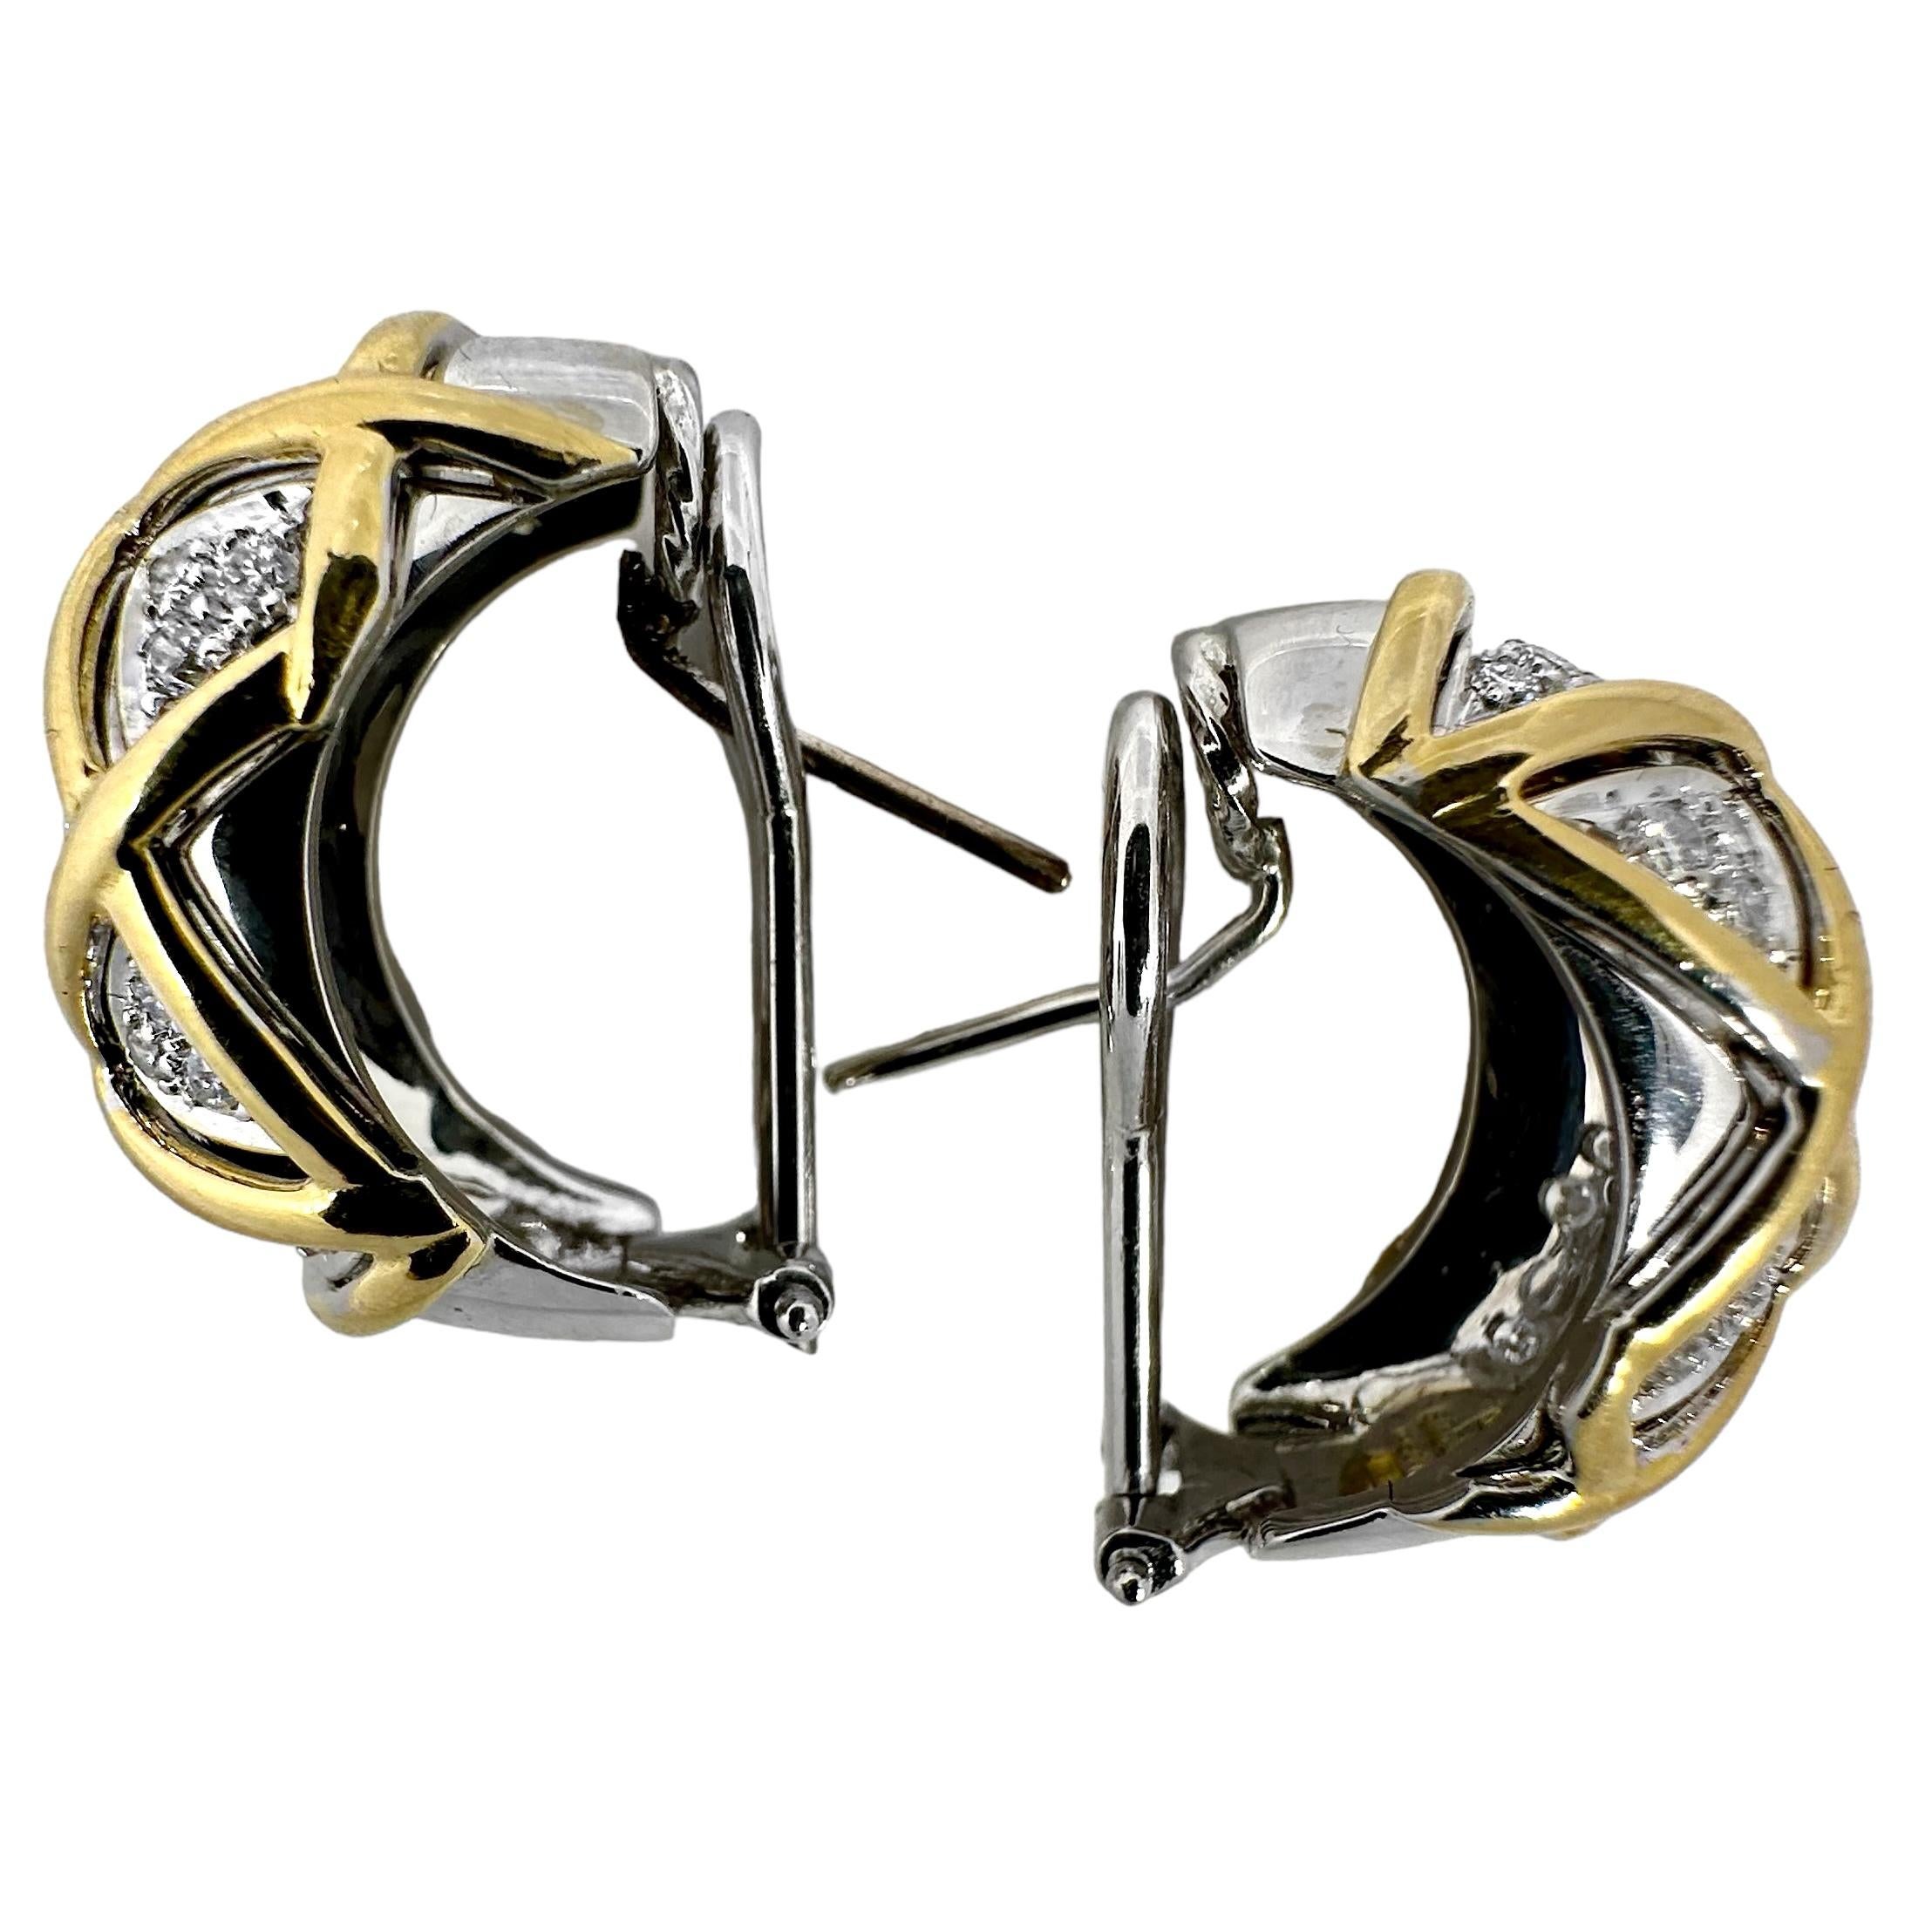 This lovely and tasteful pair of 18k yellow and white gold hoop earrings were designed and fabricated by the highly regarded house of Sabbadini in Milan Italy, during the latter part of the 20th Century. Set with a total of 58 brilliant cut diamonds